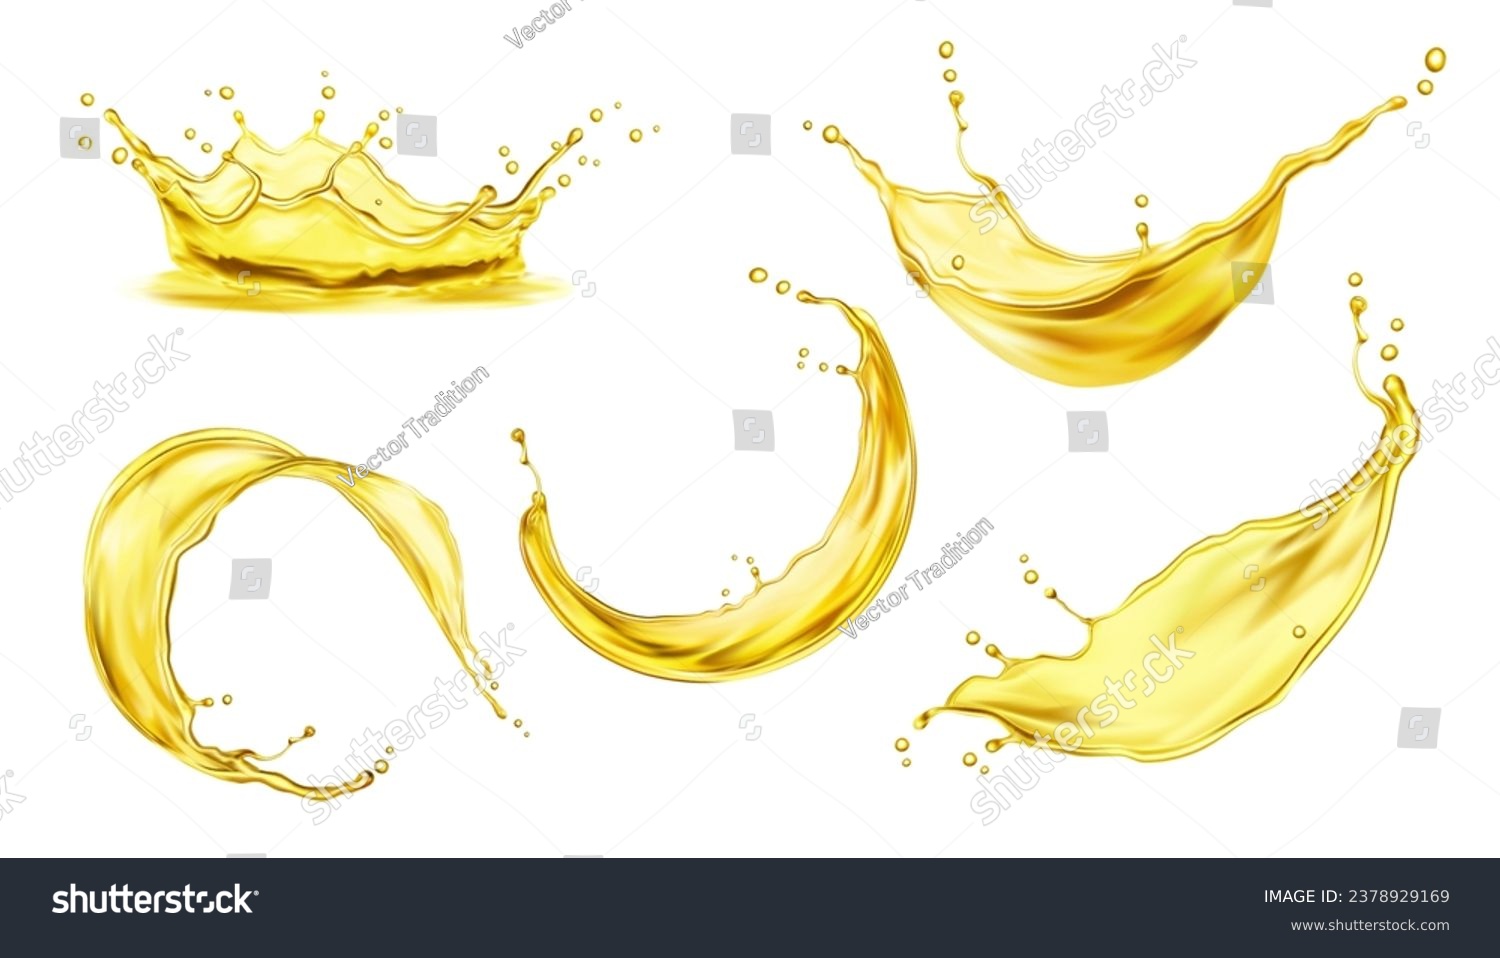 SVG of Beer or soda drink, honey, oil or juice splashes. Realistic yellow liquid swirl, transparent wave flow and crown splash set with vector 3d gold drops and ripples, refreshment beverage or food ad svg